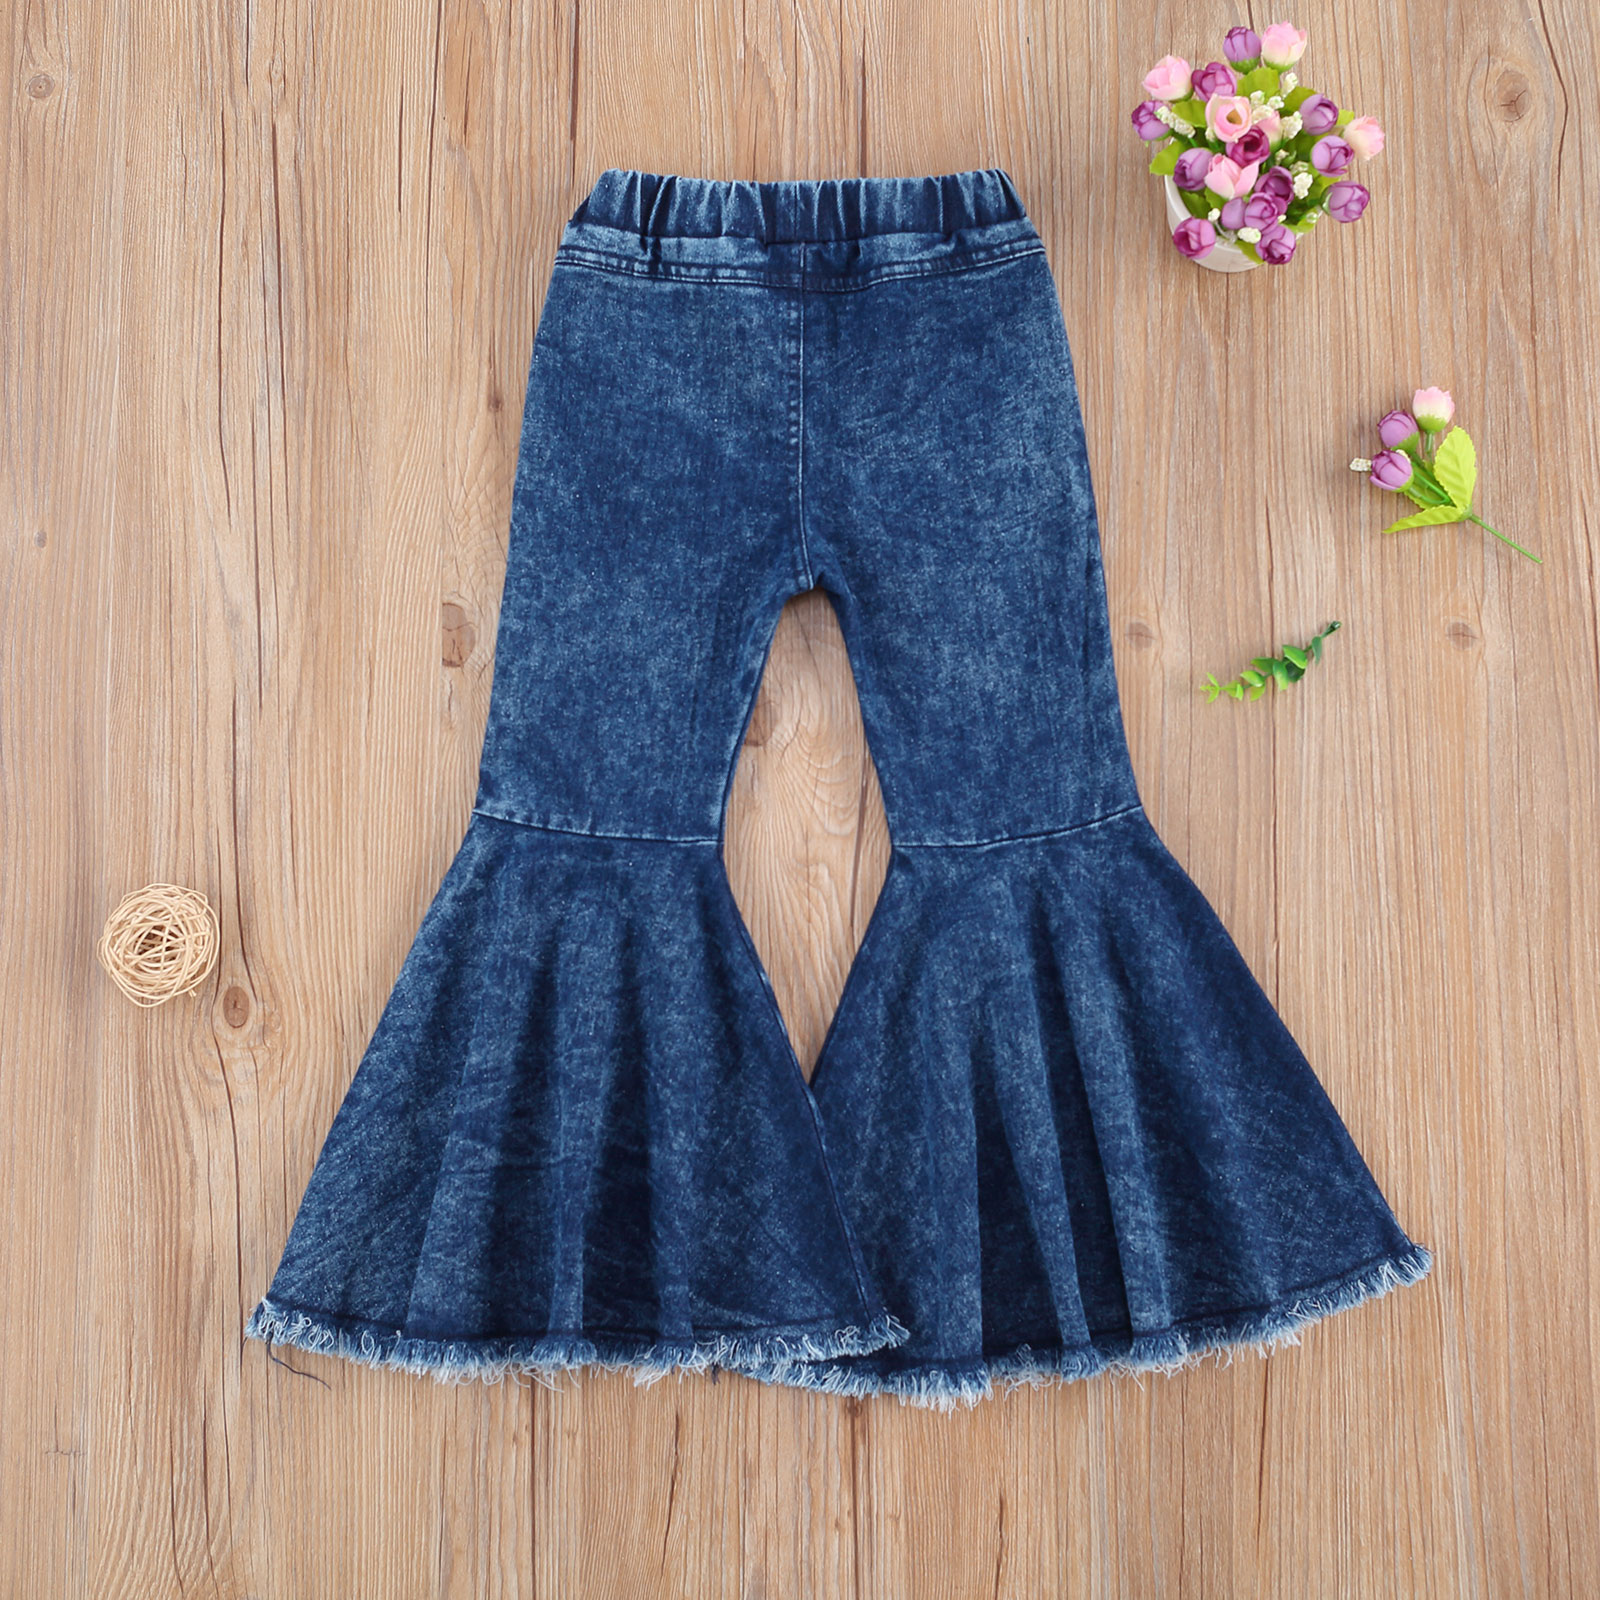 2-7Y Toddler Kids Girls Jeans Pants Outfits Elastic High Waist Ripped Flare Trousers Pants